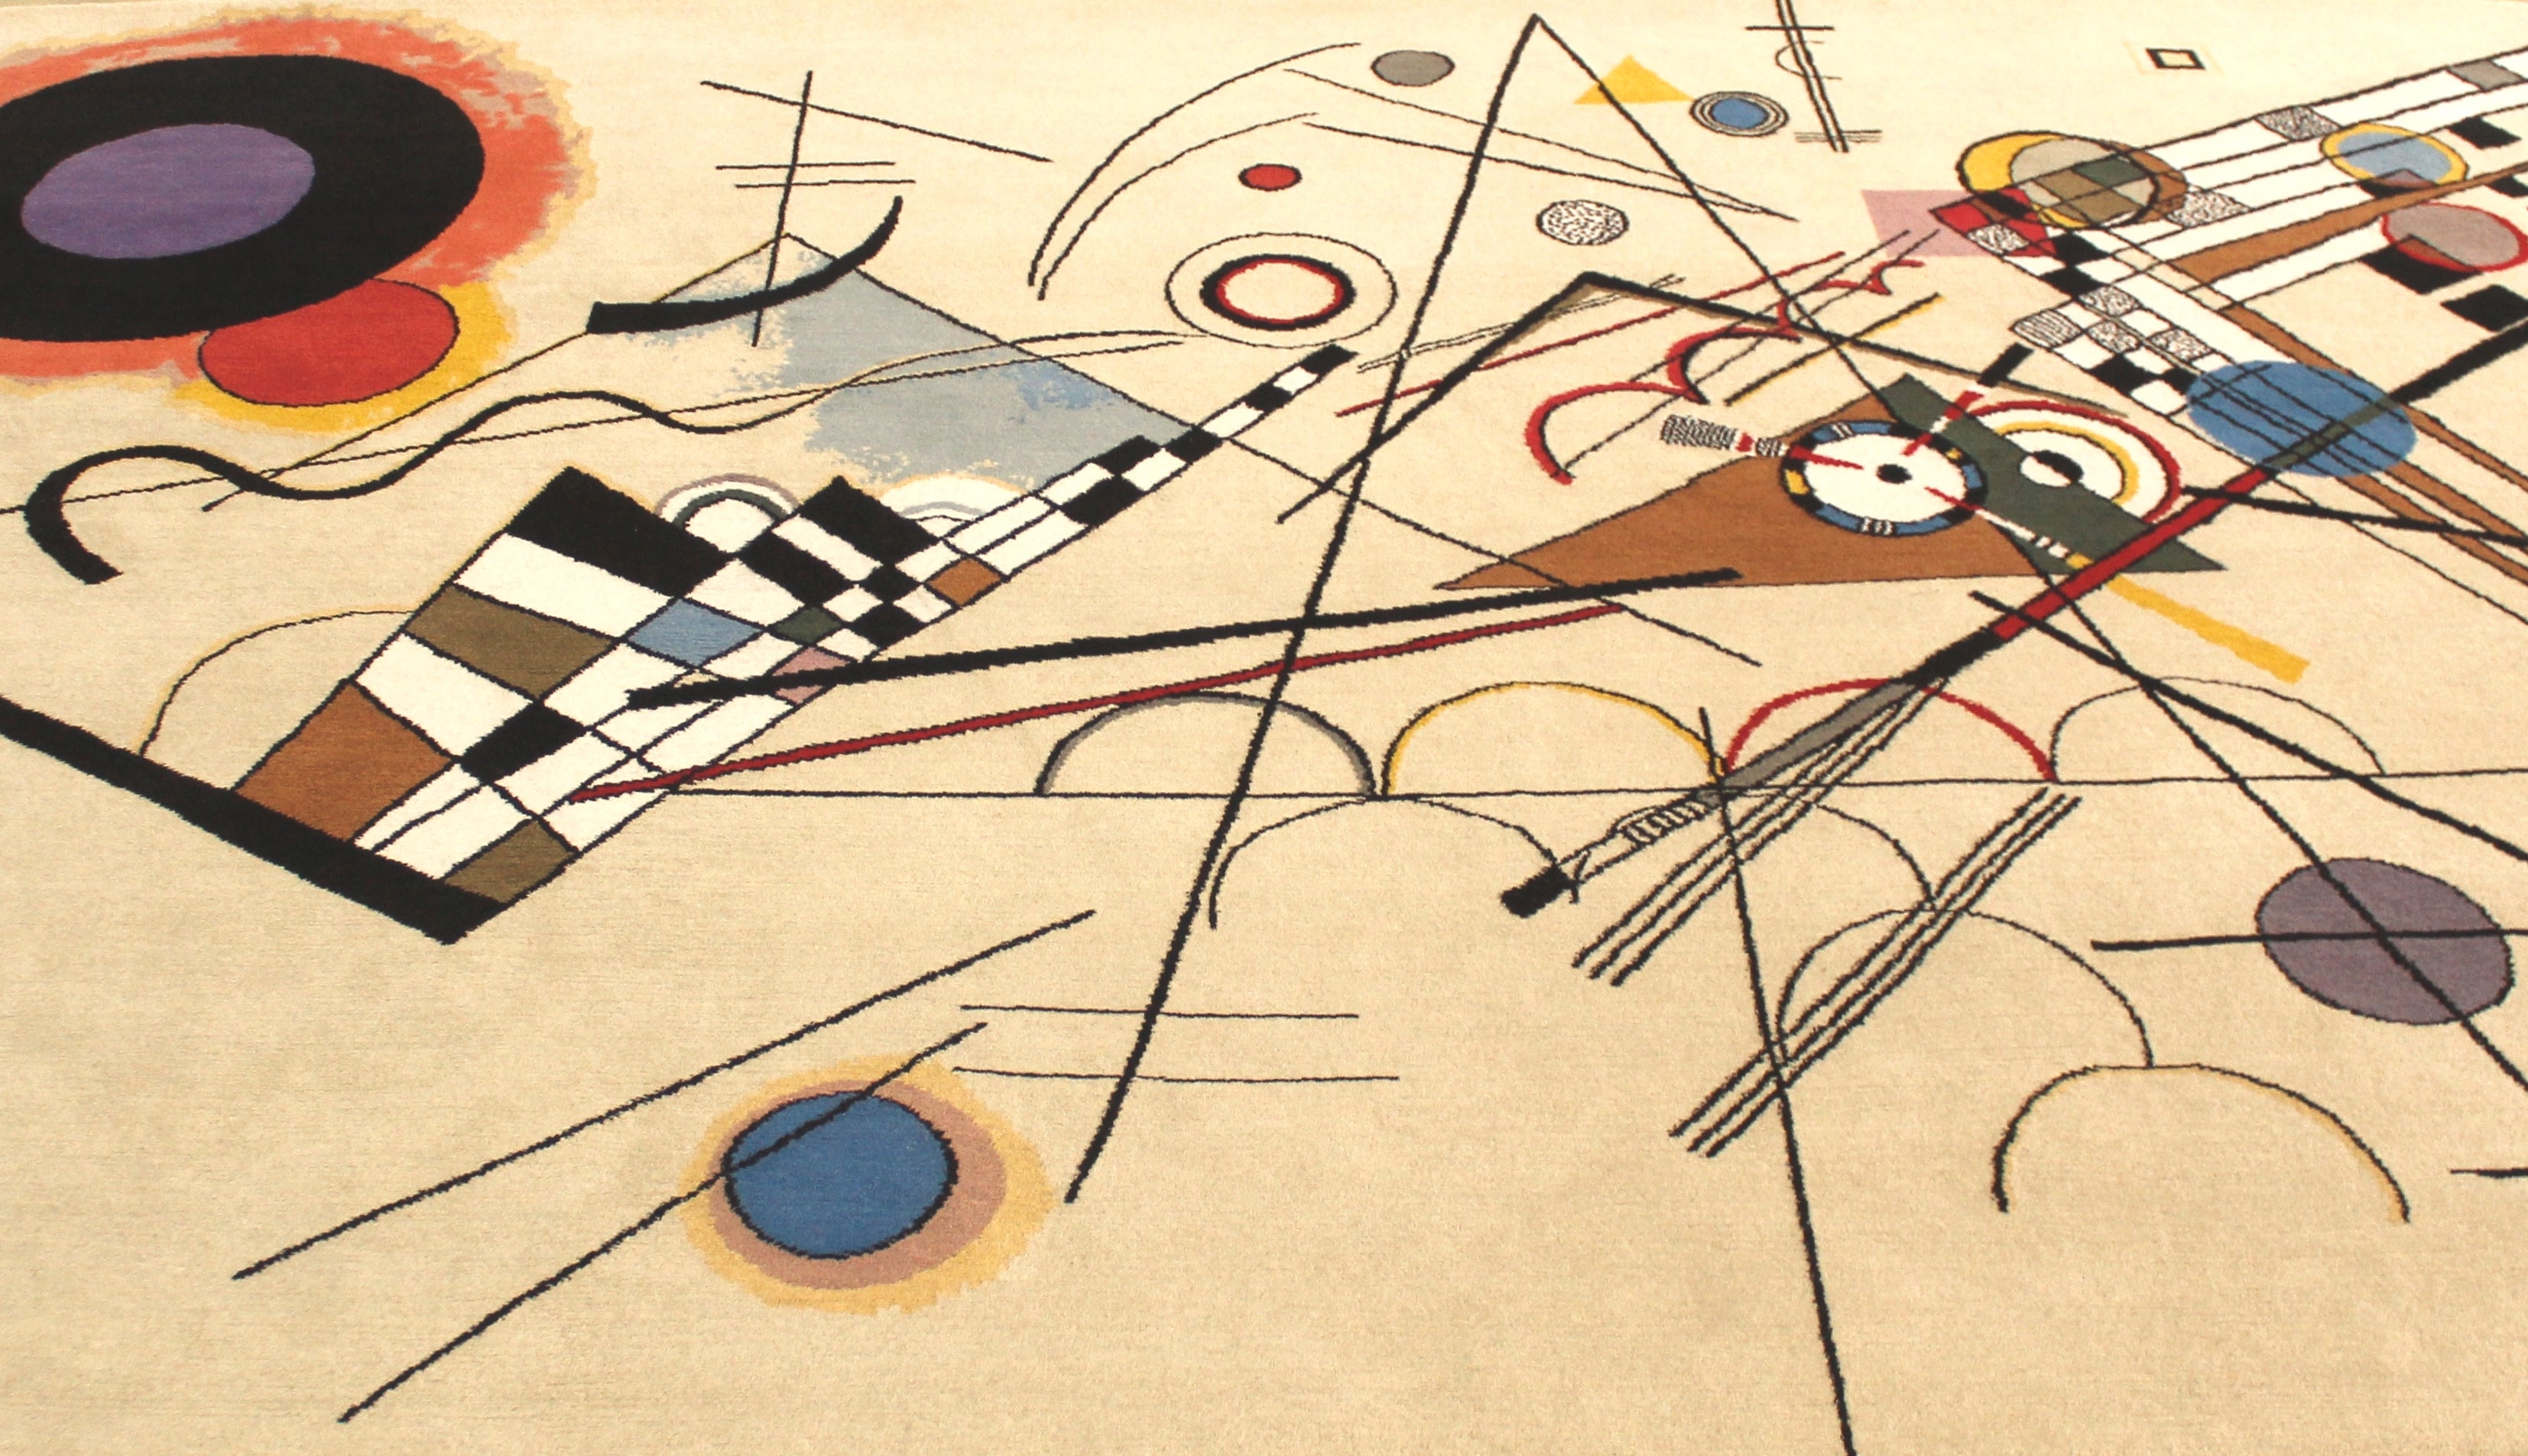 Custom Hand knotted Rug, after Wassily Kandinsky “Composition VIII”. Wool, silk